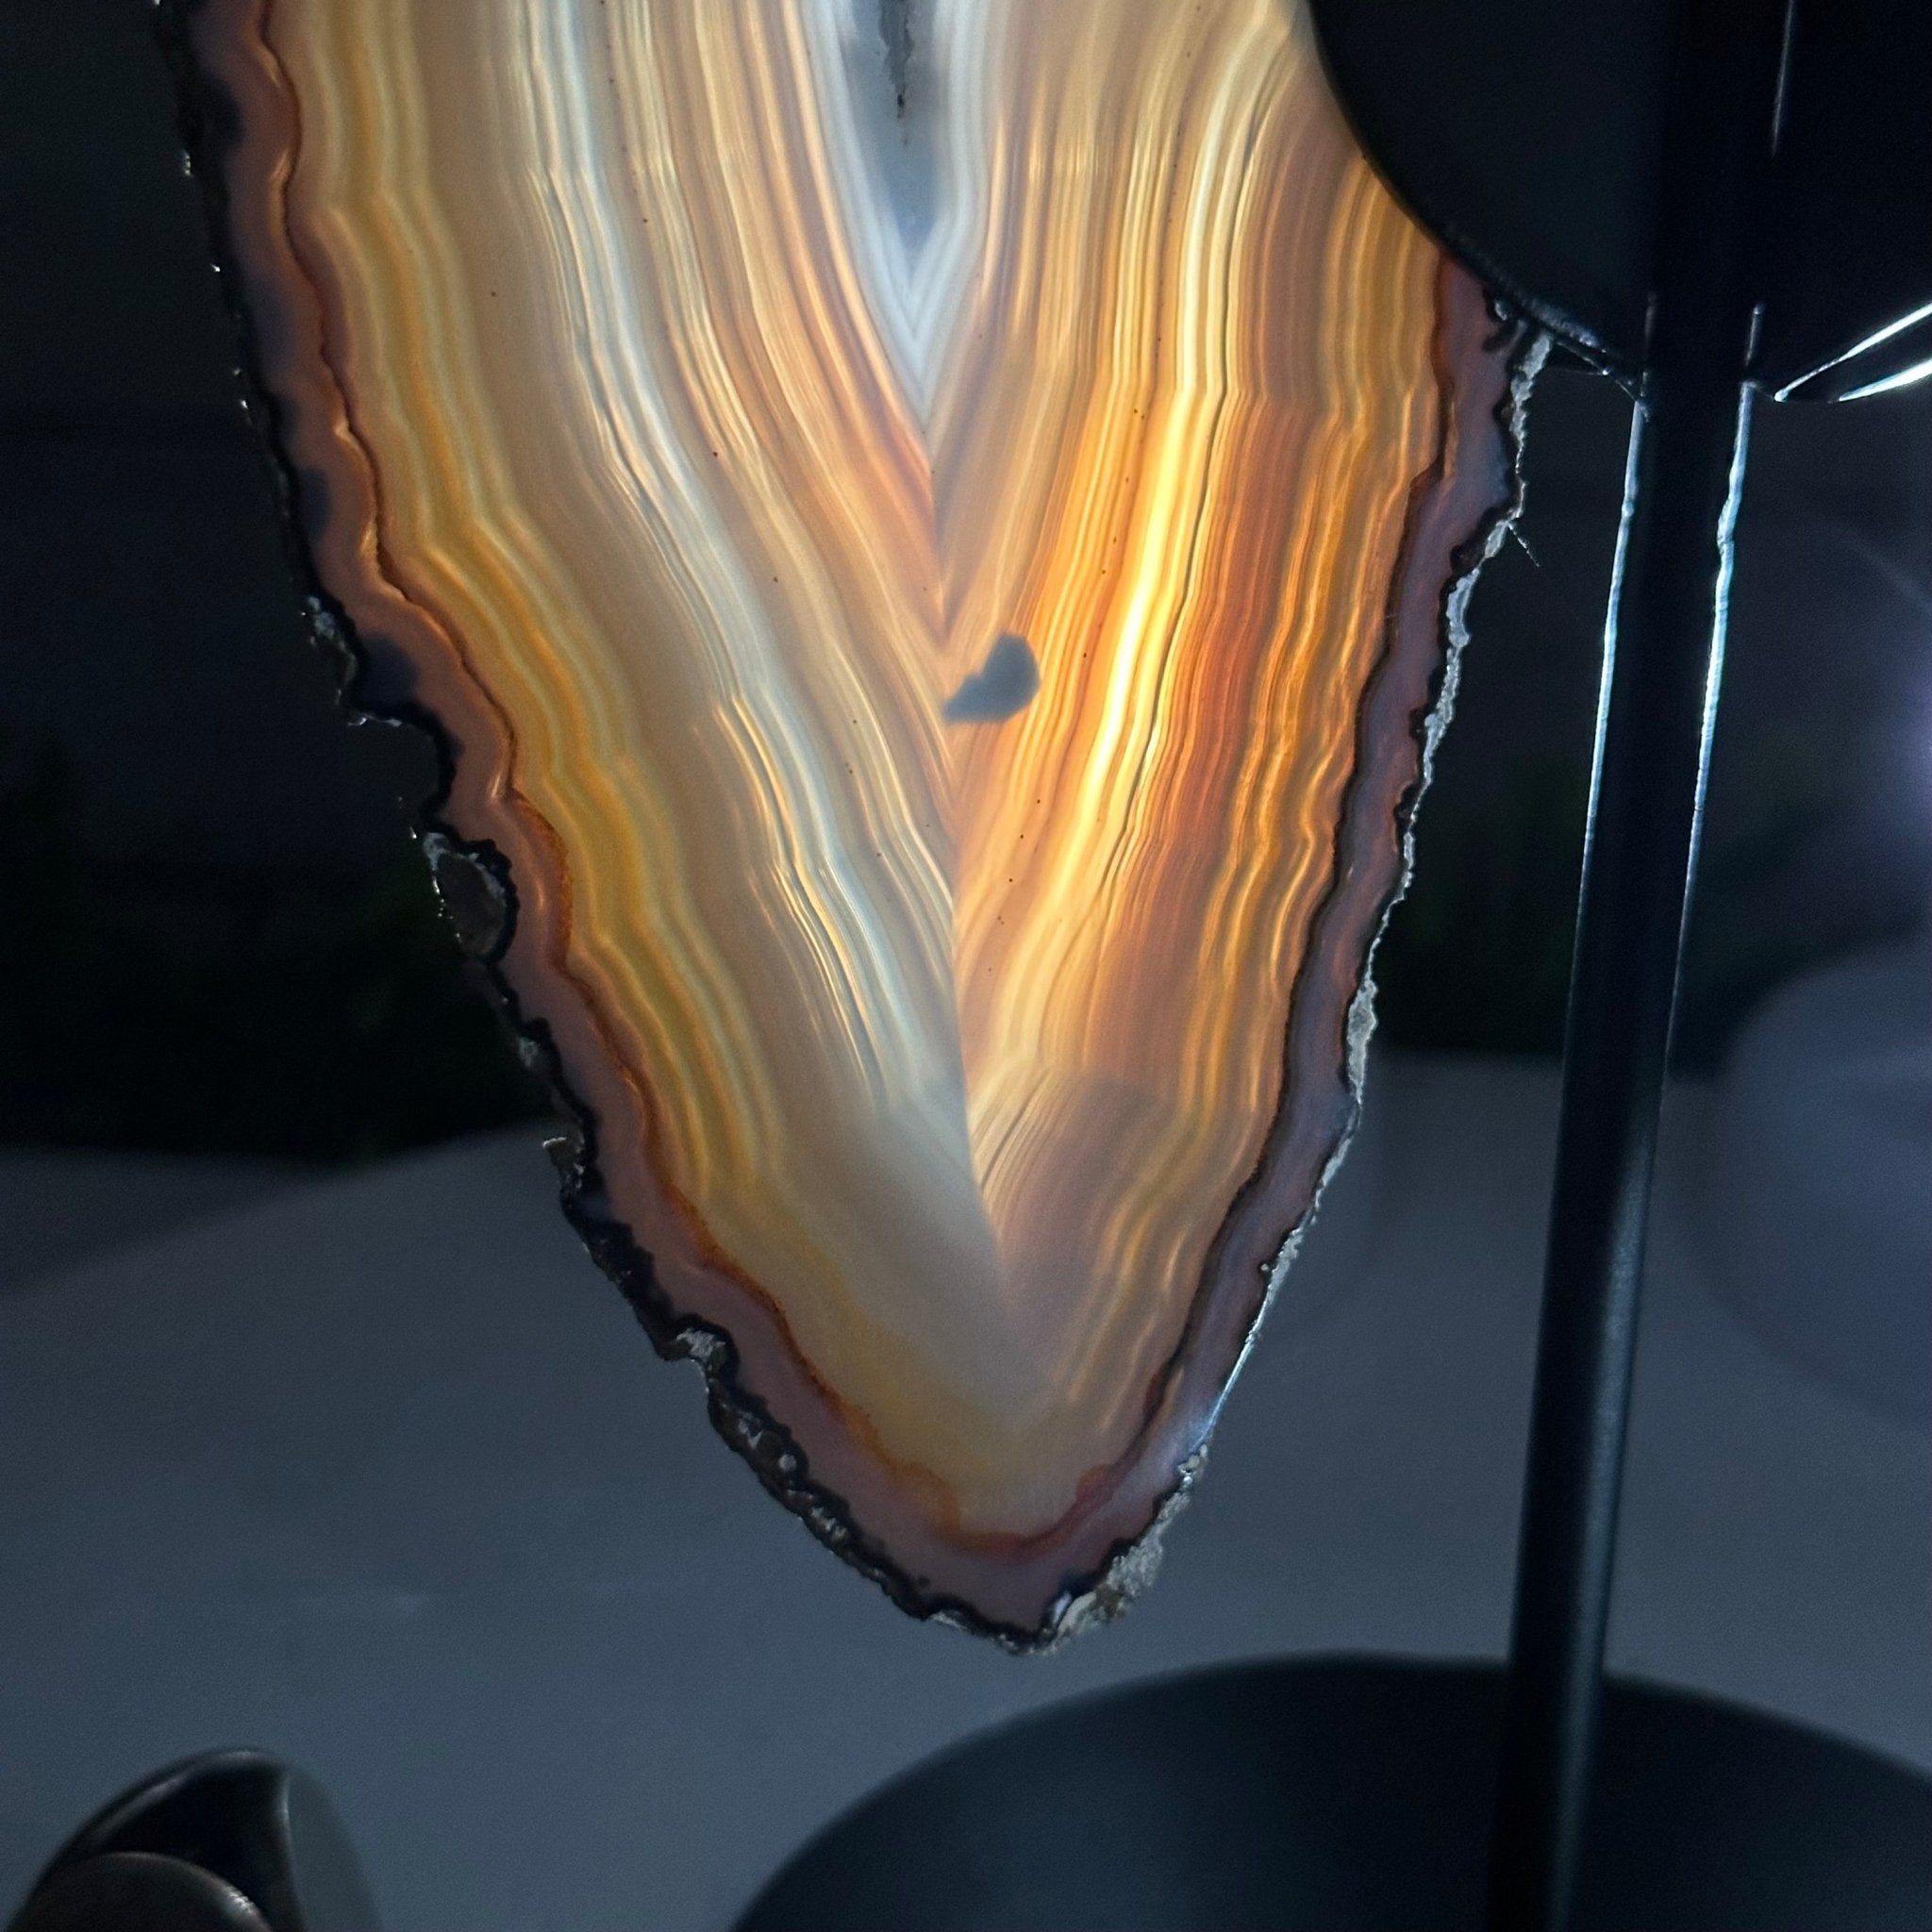 Natural Brazilian Agate "Butterfly Wings", 10.7" Tall #5050NA-117 - Brazil GemsBrazil GemsNatural Brazilian Agate "Butterfly Wings", 10.7" Tall #5050NA-117Agate Butterfly Wings5050NA-117